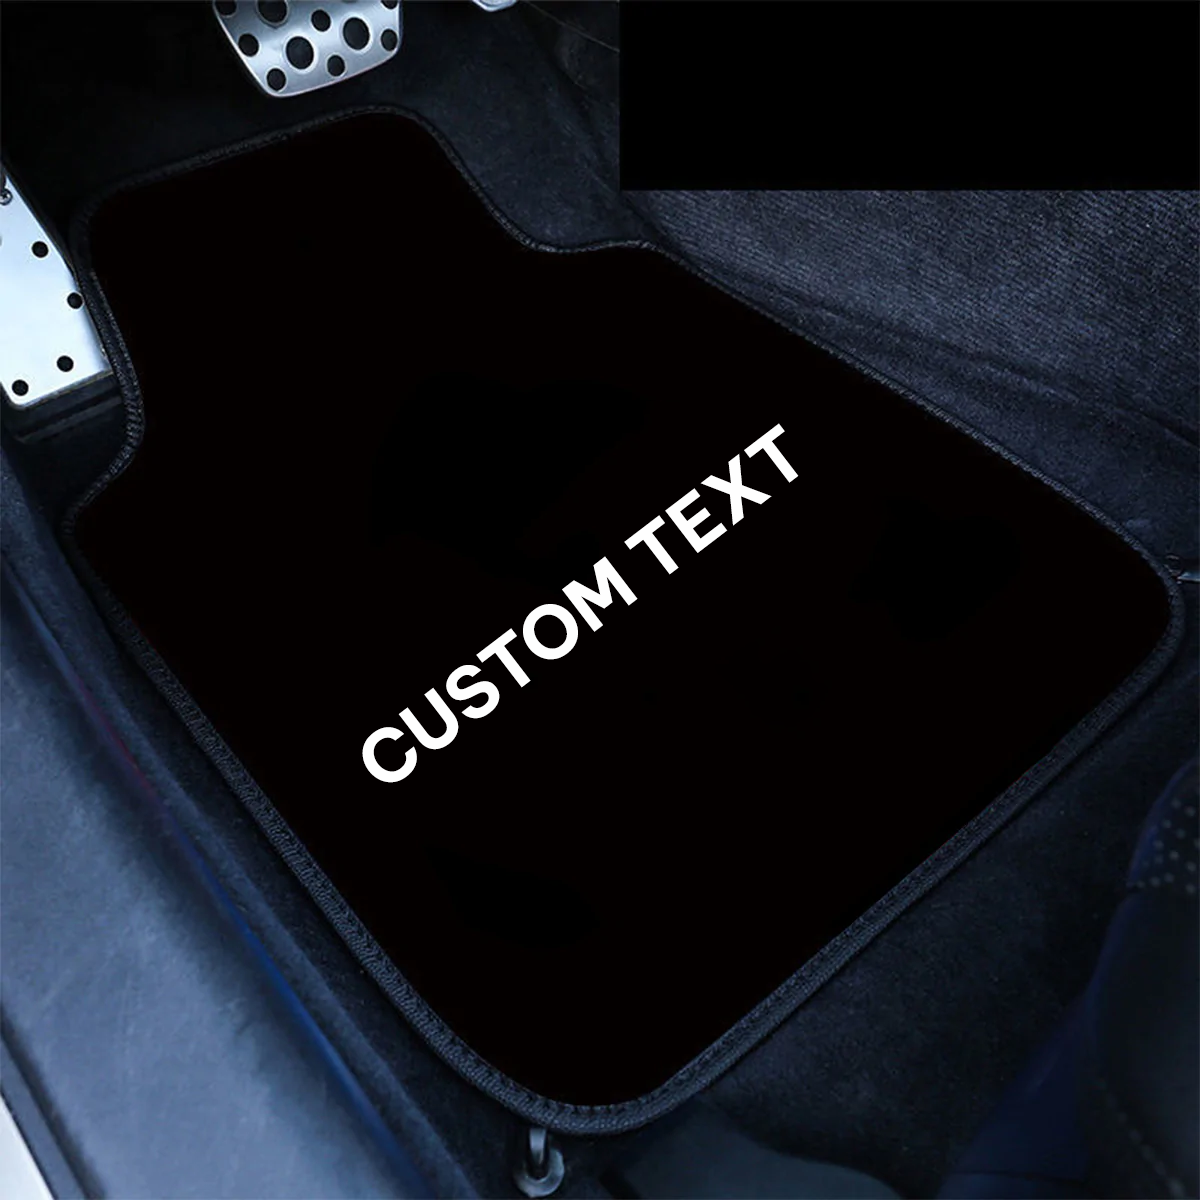 Custom Text For Carpet Floor Mats Set of 4pcs, Compatible with All Cars, Fit Car Floor Mats, All Weather Protection, Universal Type LE13984